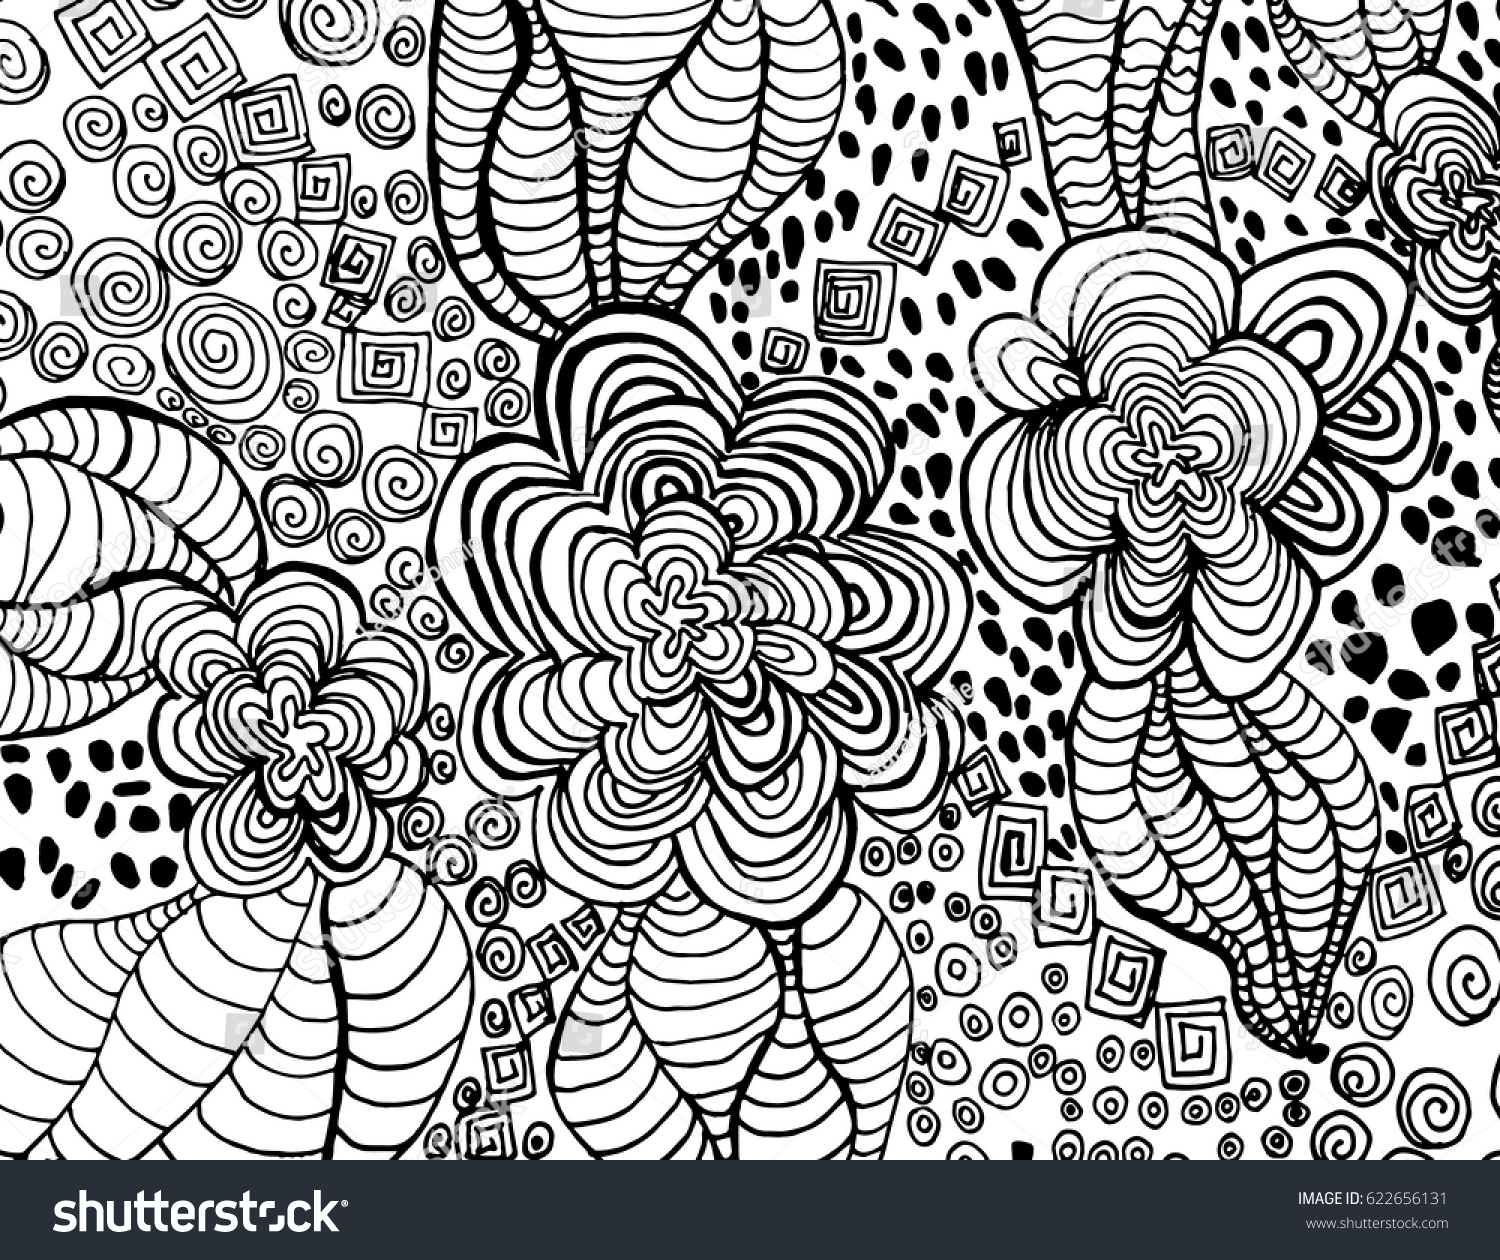 Coloring Page Stock Illustration 622656131 | Shutterstock